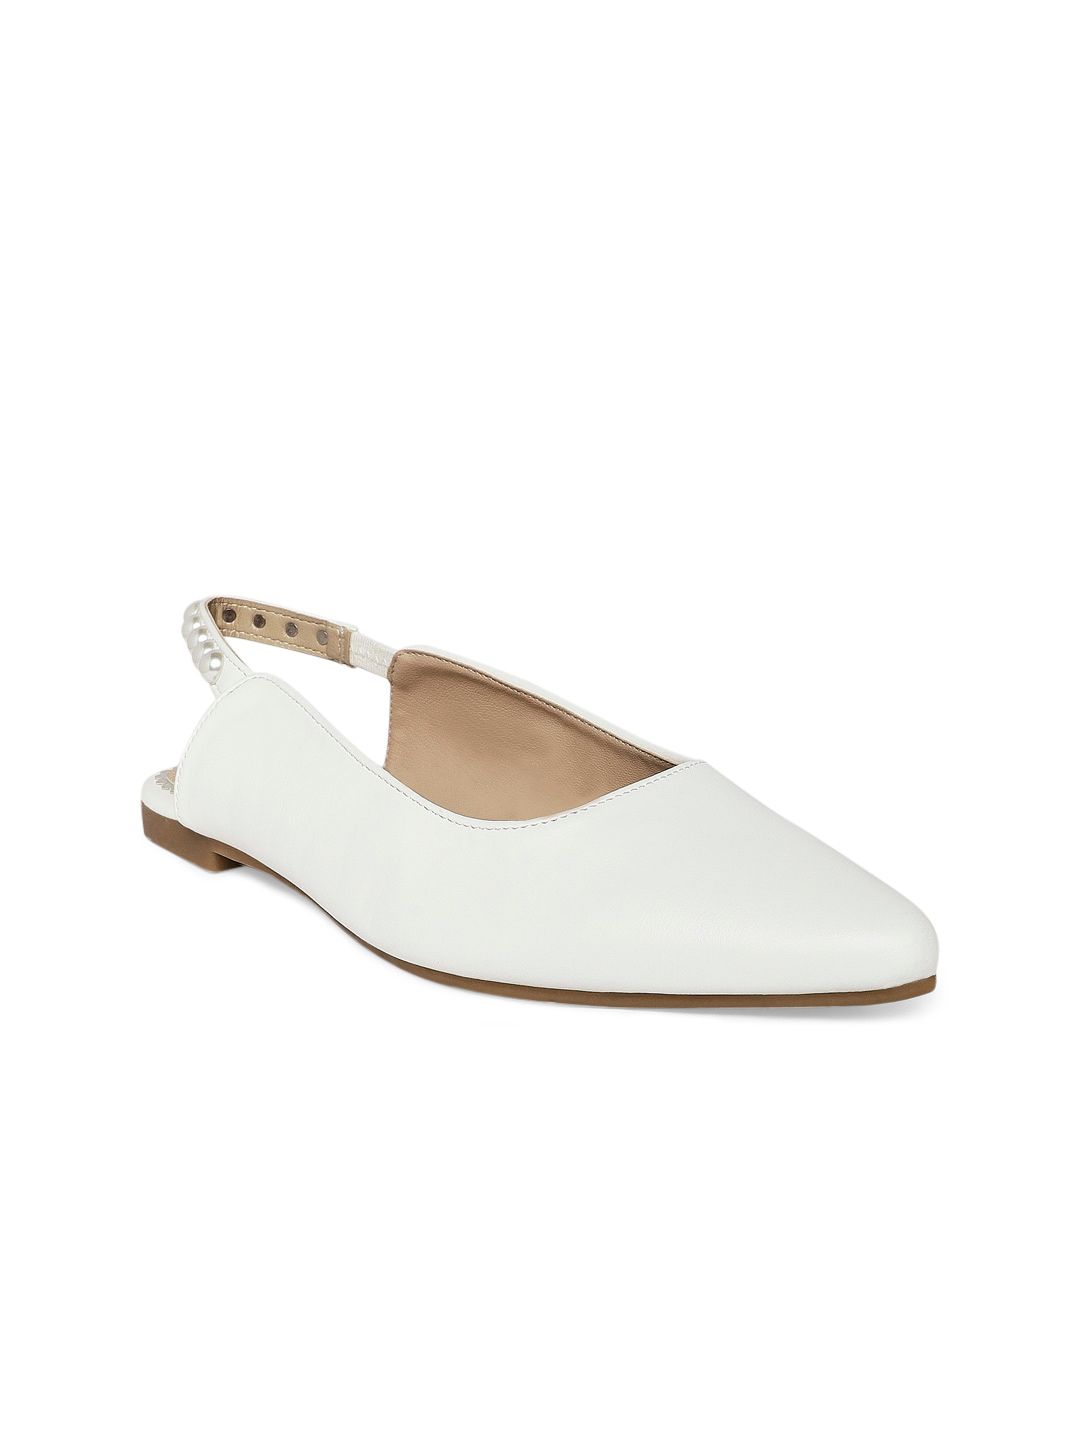 Forever Glam by Pantaloons Women White PU Flatforms Price in India